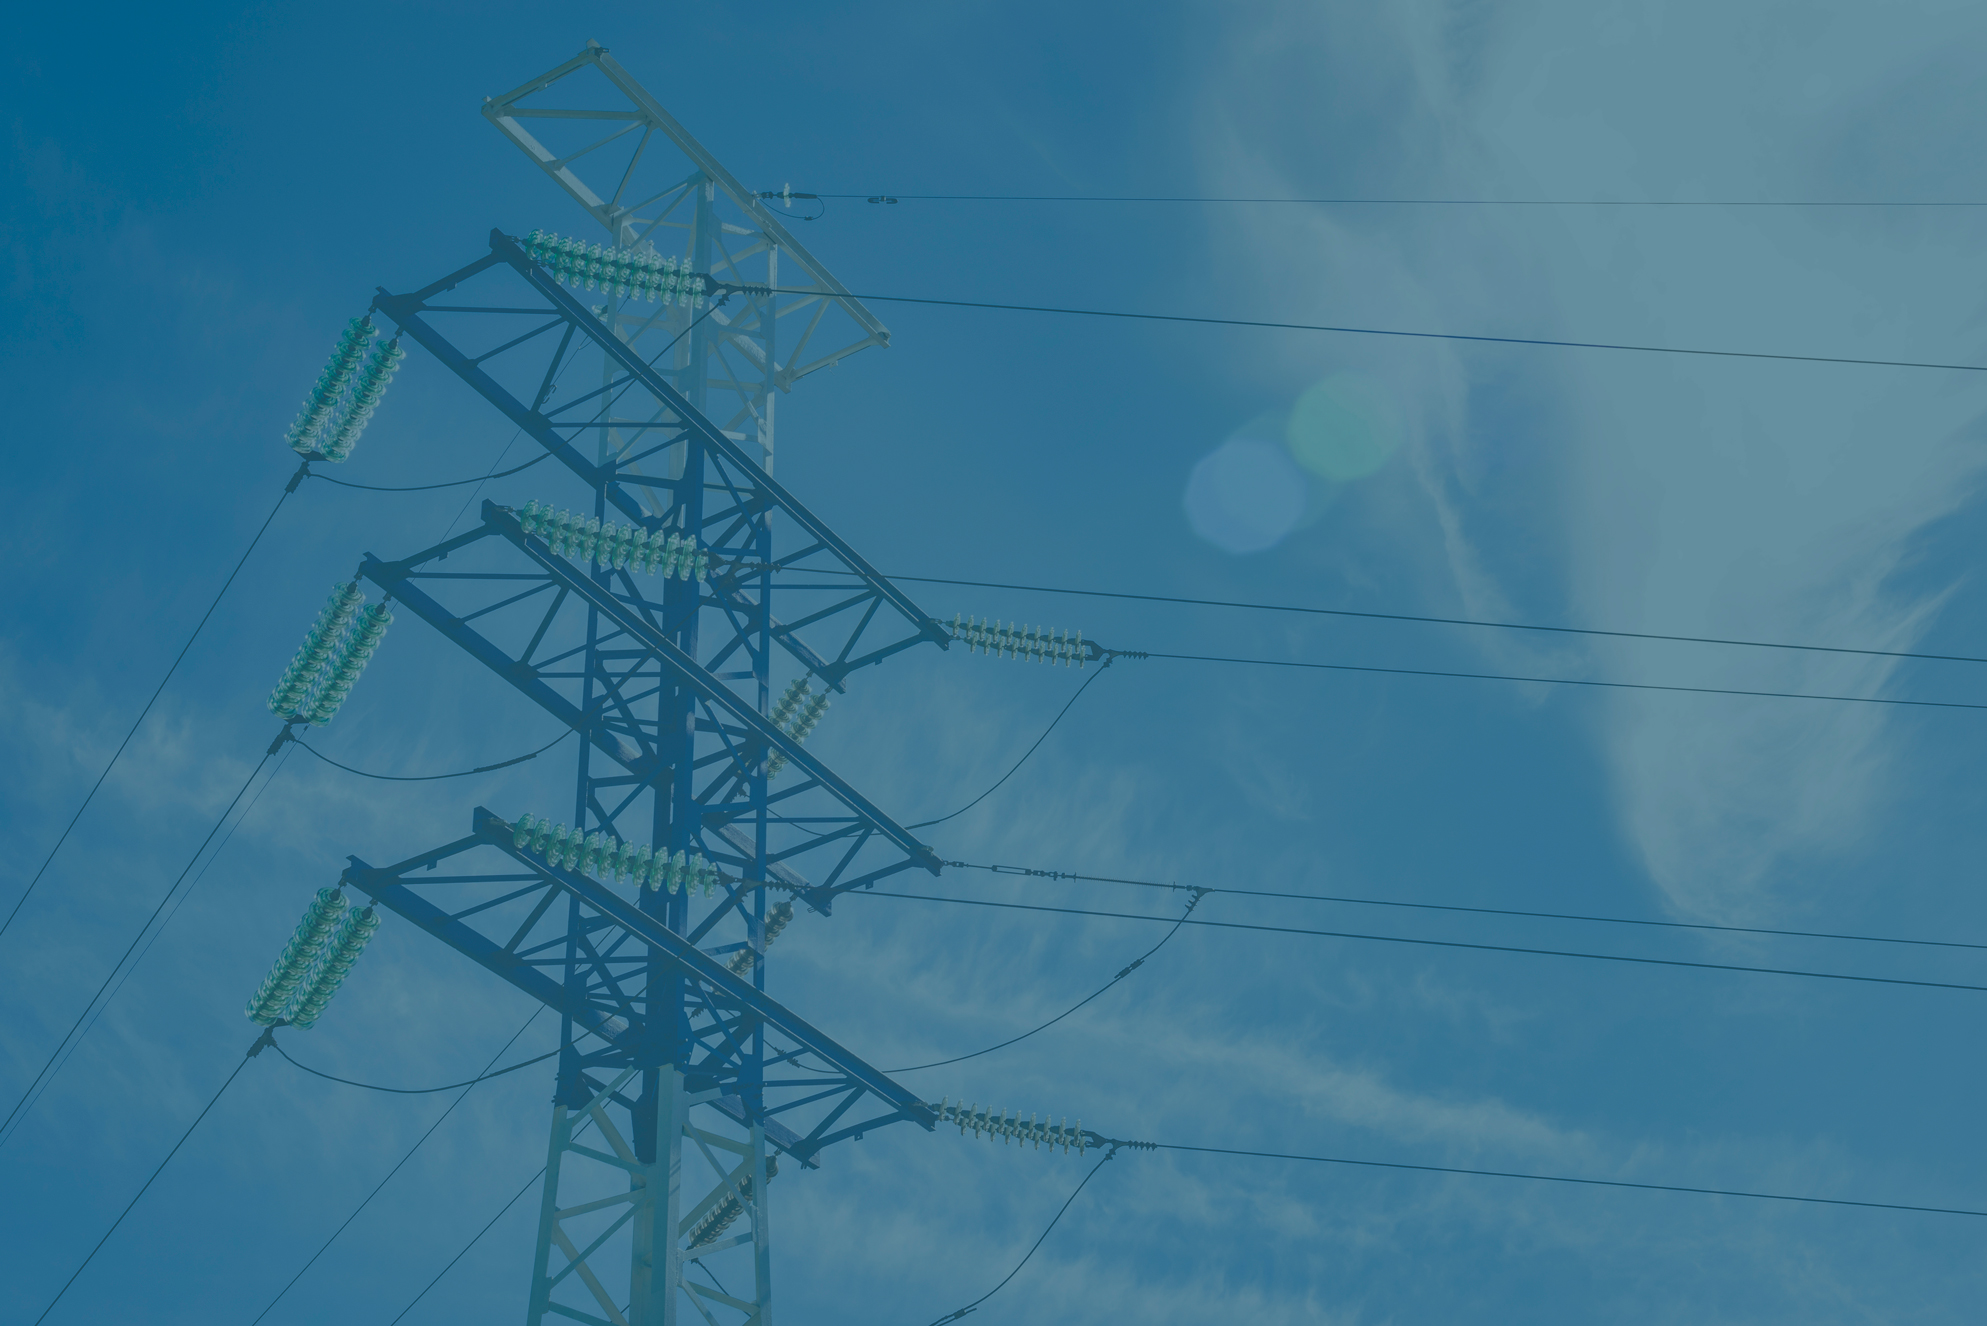 high voltage electric power pylons against blue sky